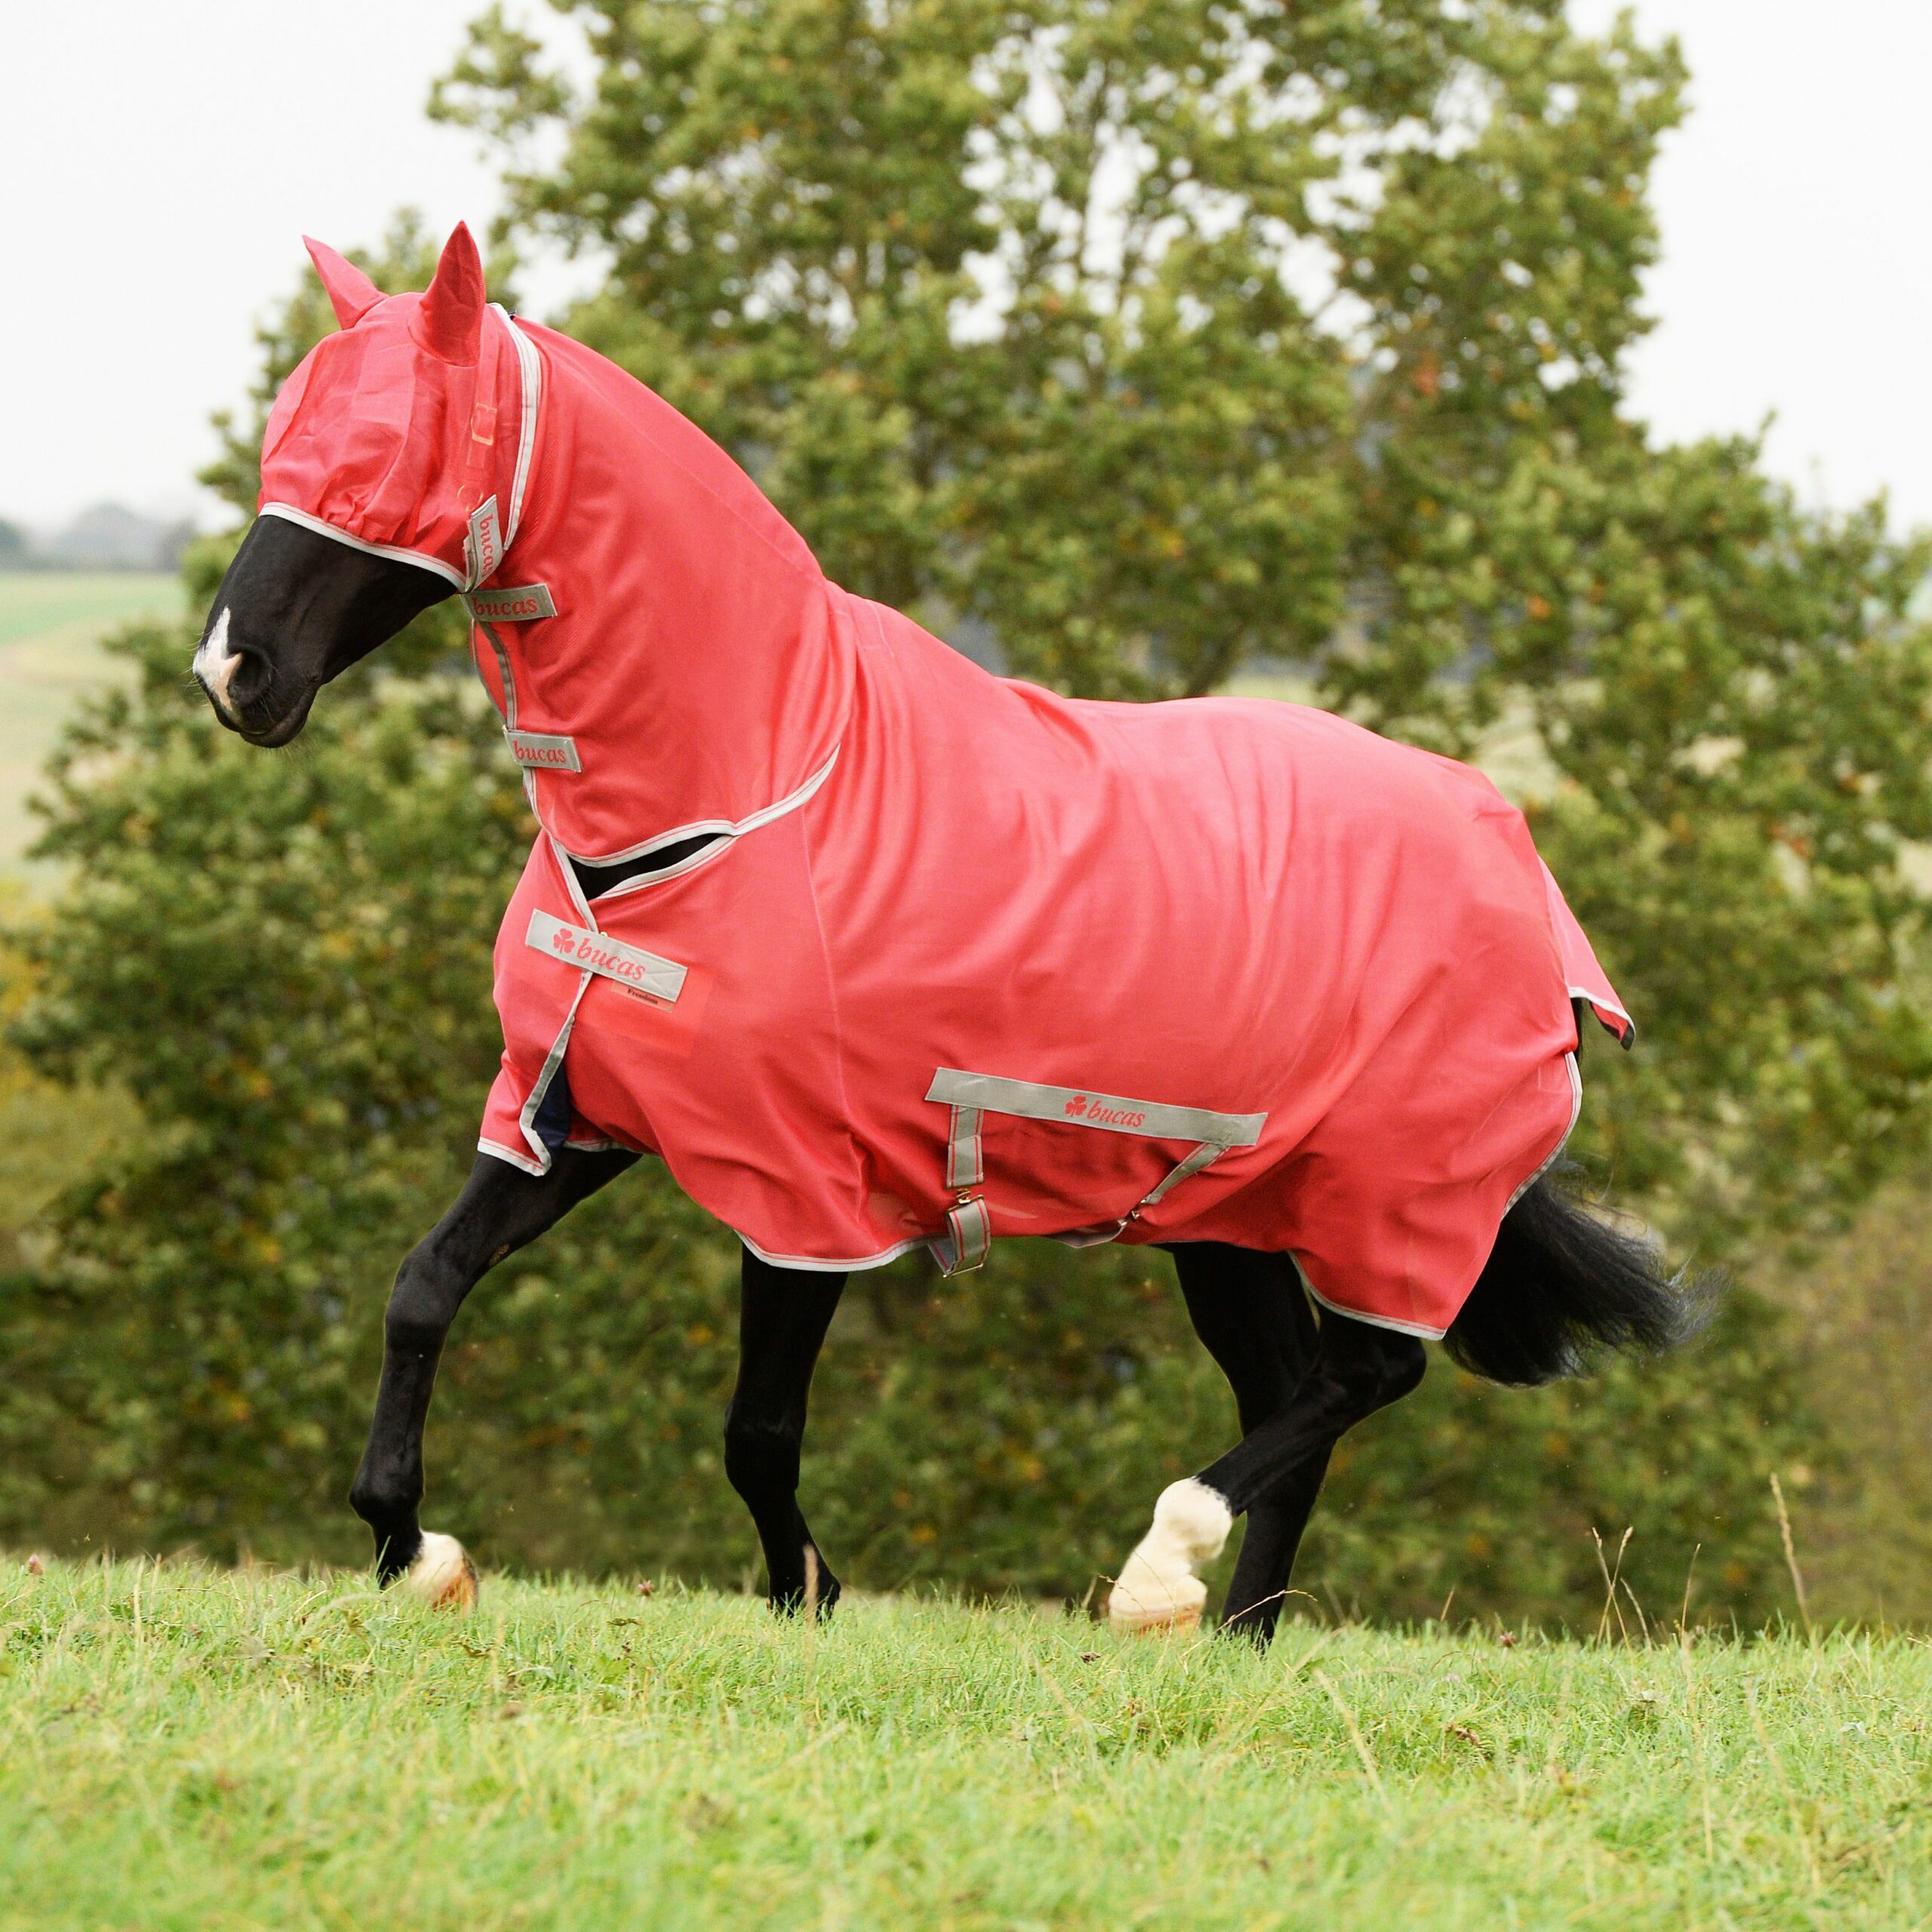 Do fly sheets protect against horse flies?